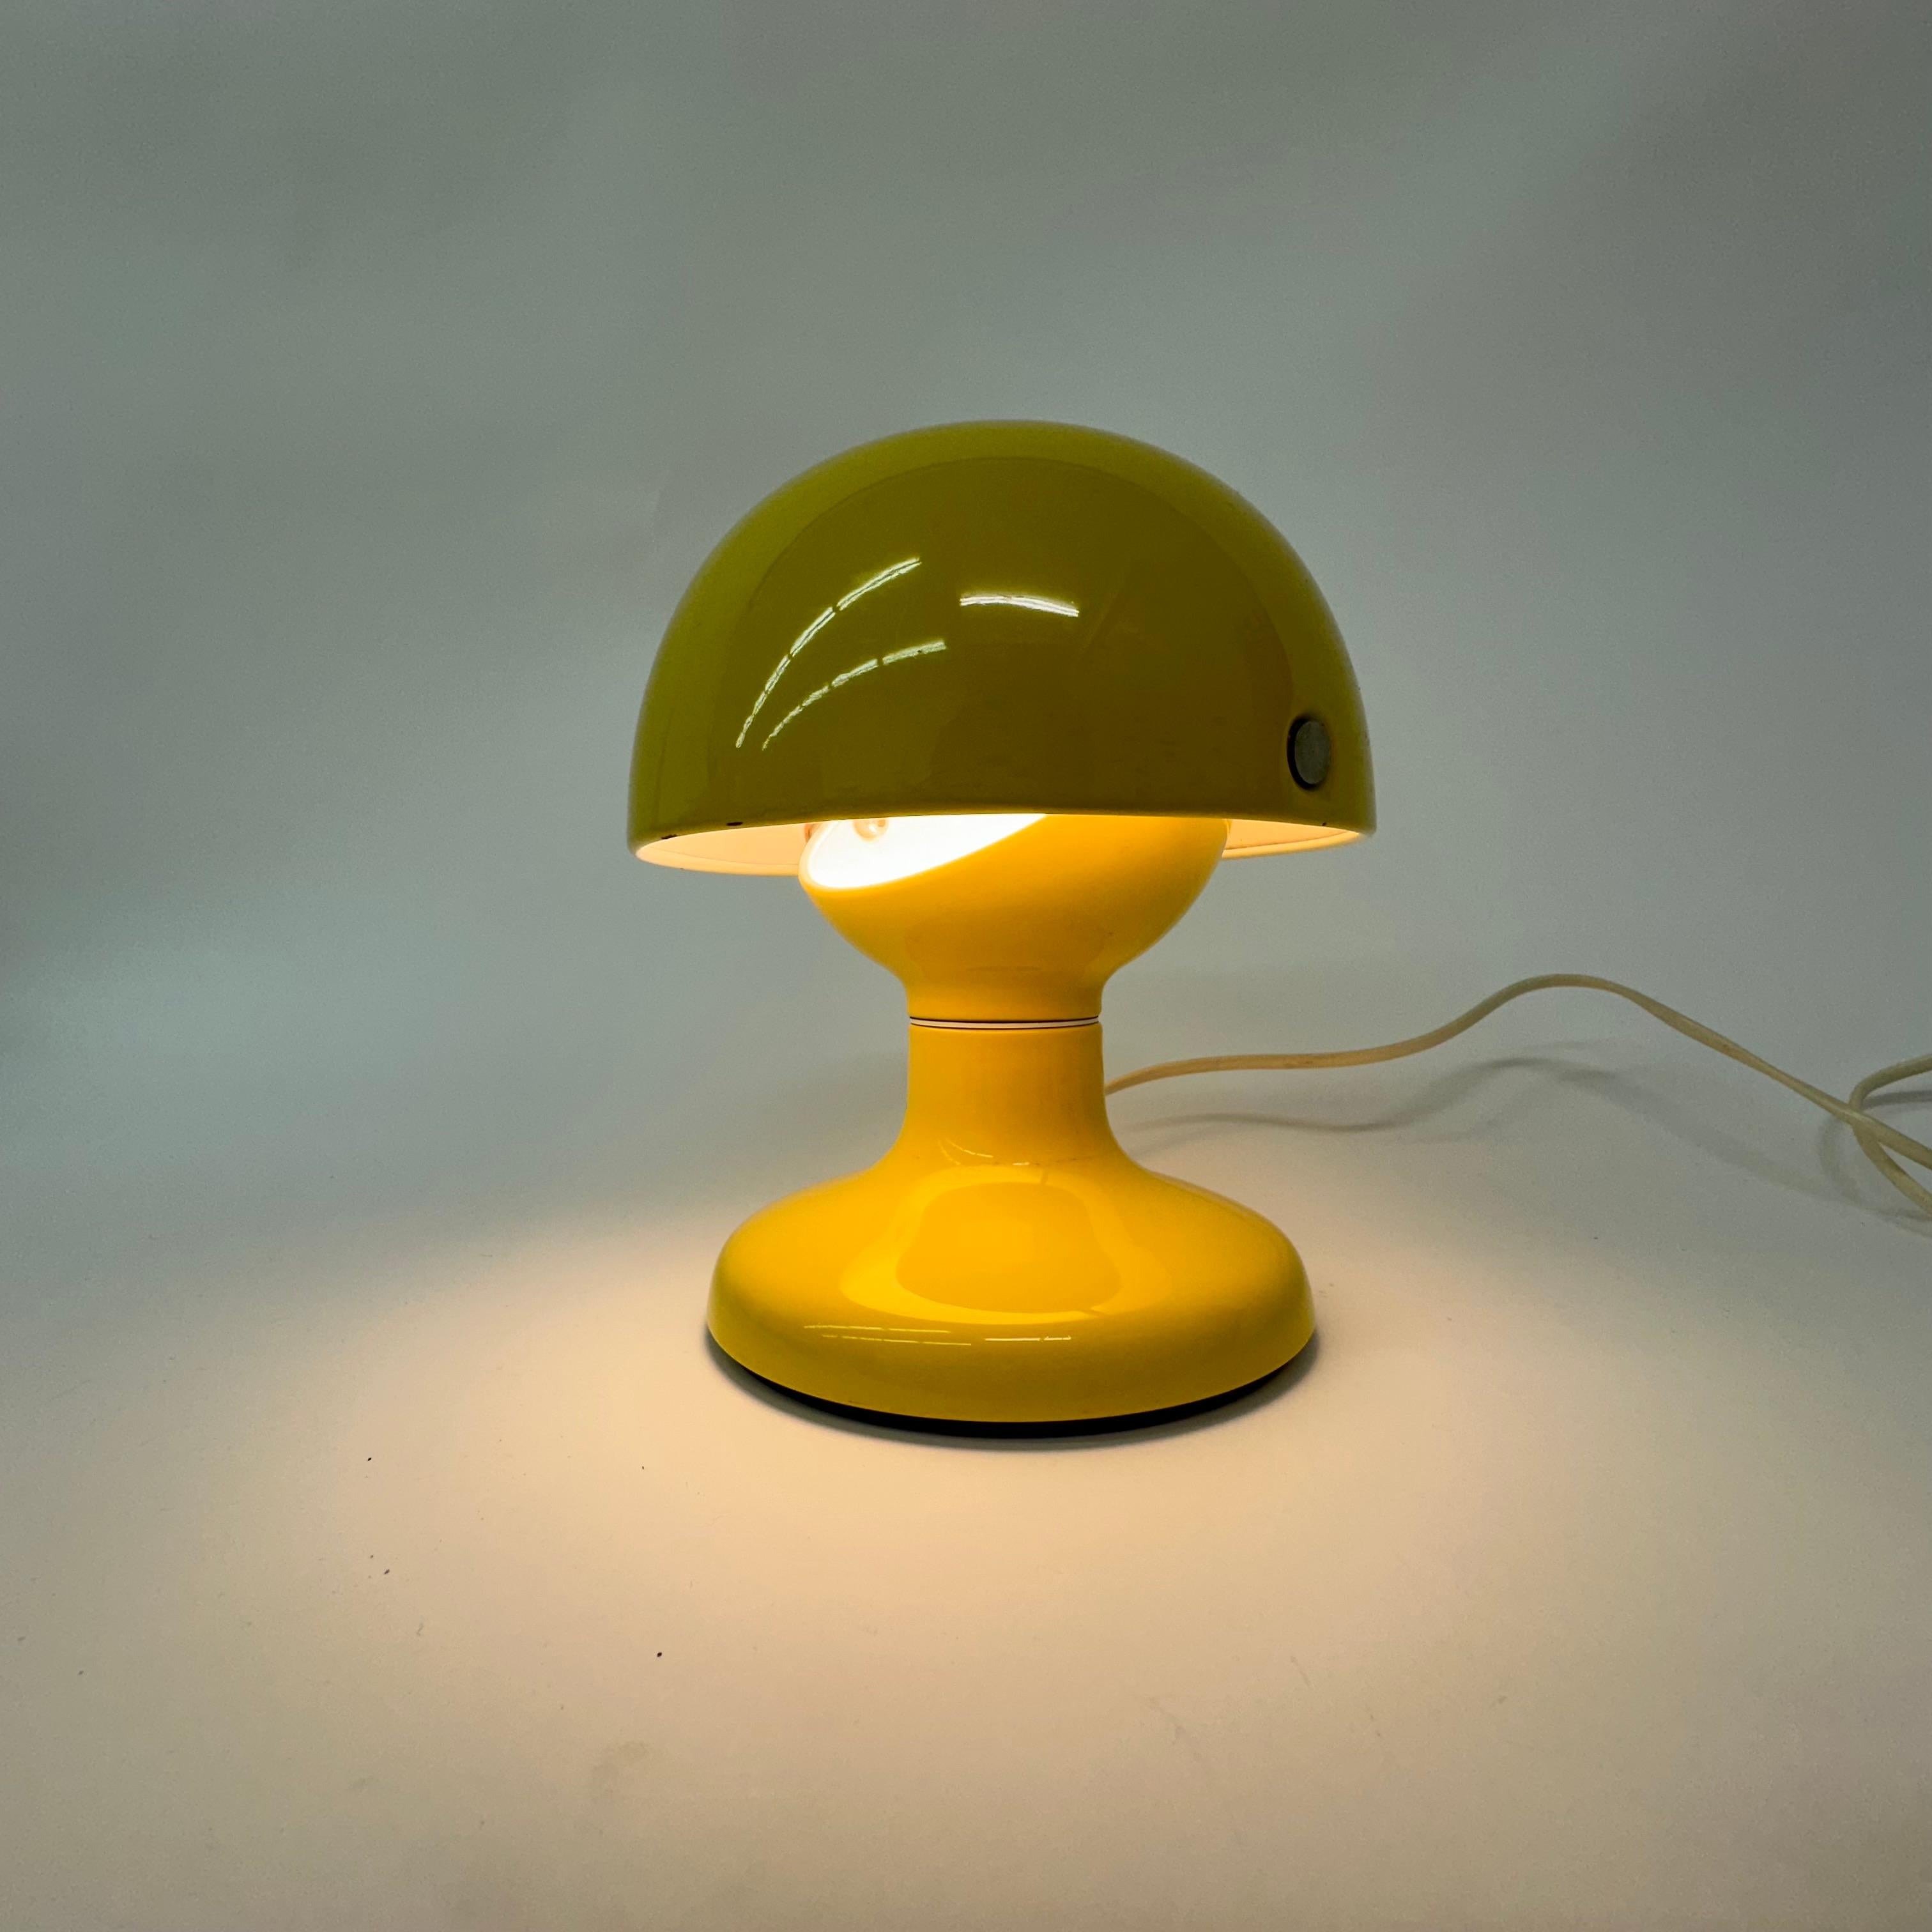 Mid-Century Modern Mid-Century Design Jucker table lamp by Tobia Scarpa for Flos , Italy , 1960s For Sale